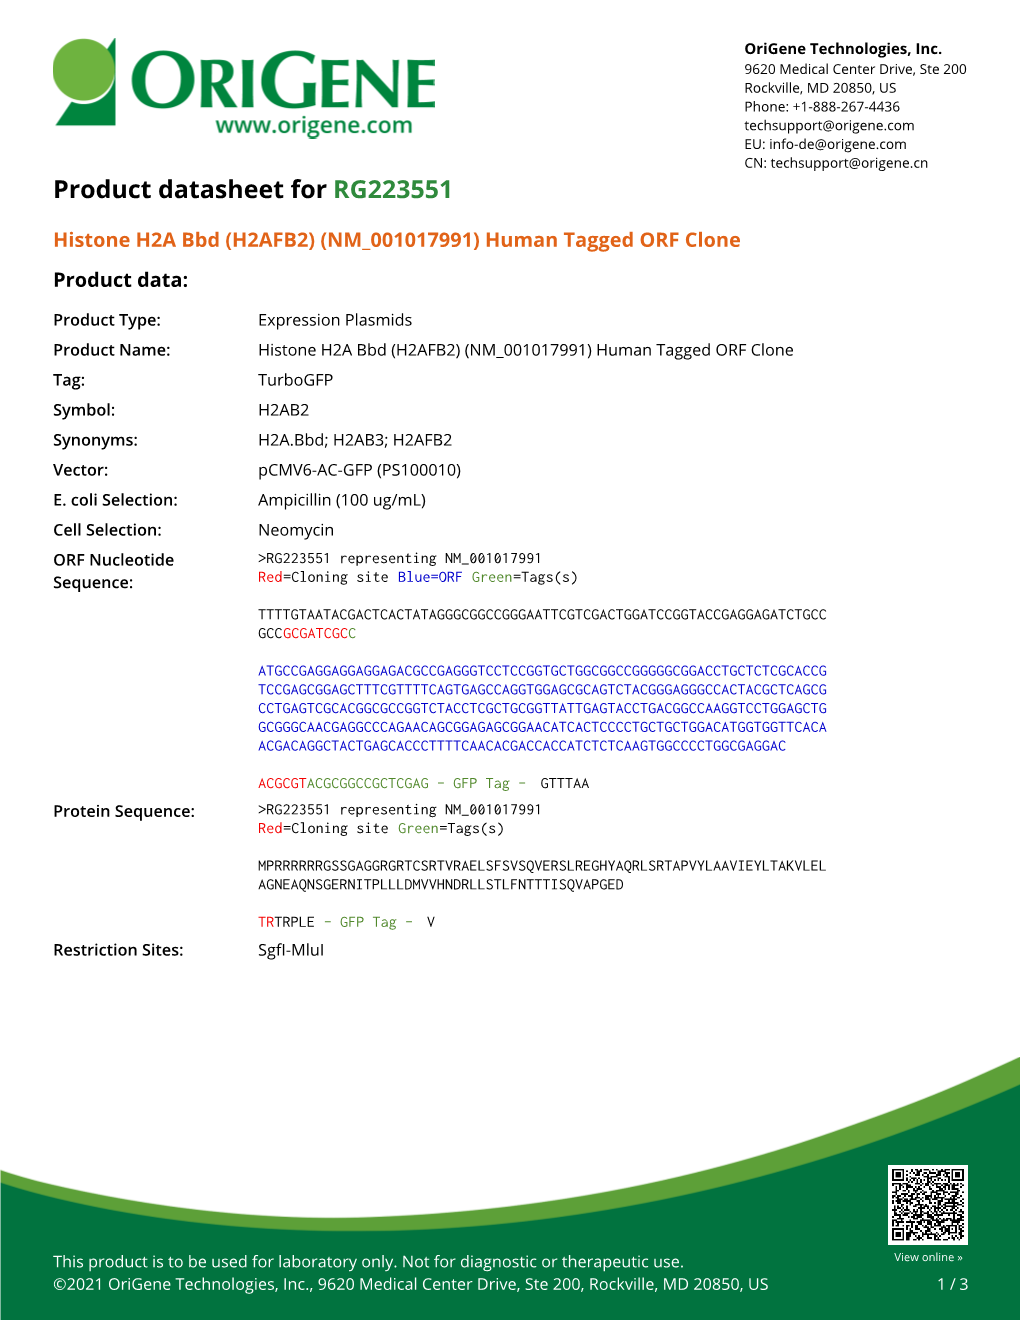 Histone H2A Bbd (H2AFB2) (NM 001017991) Human Tagged ORF Clone Product Data